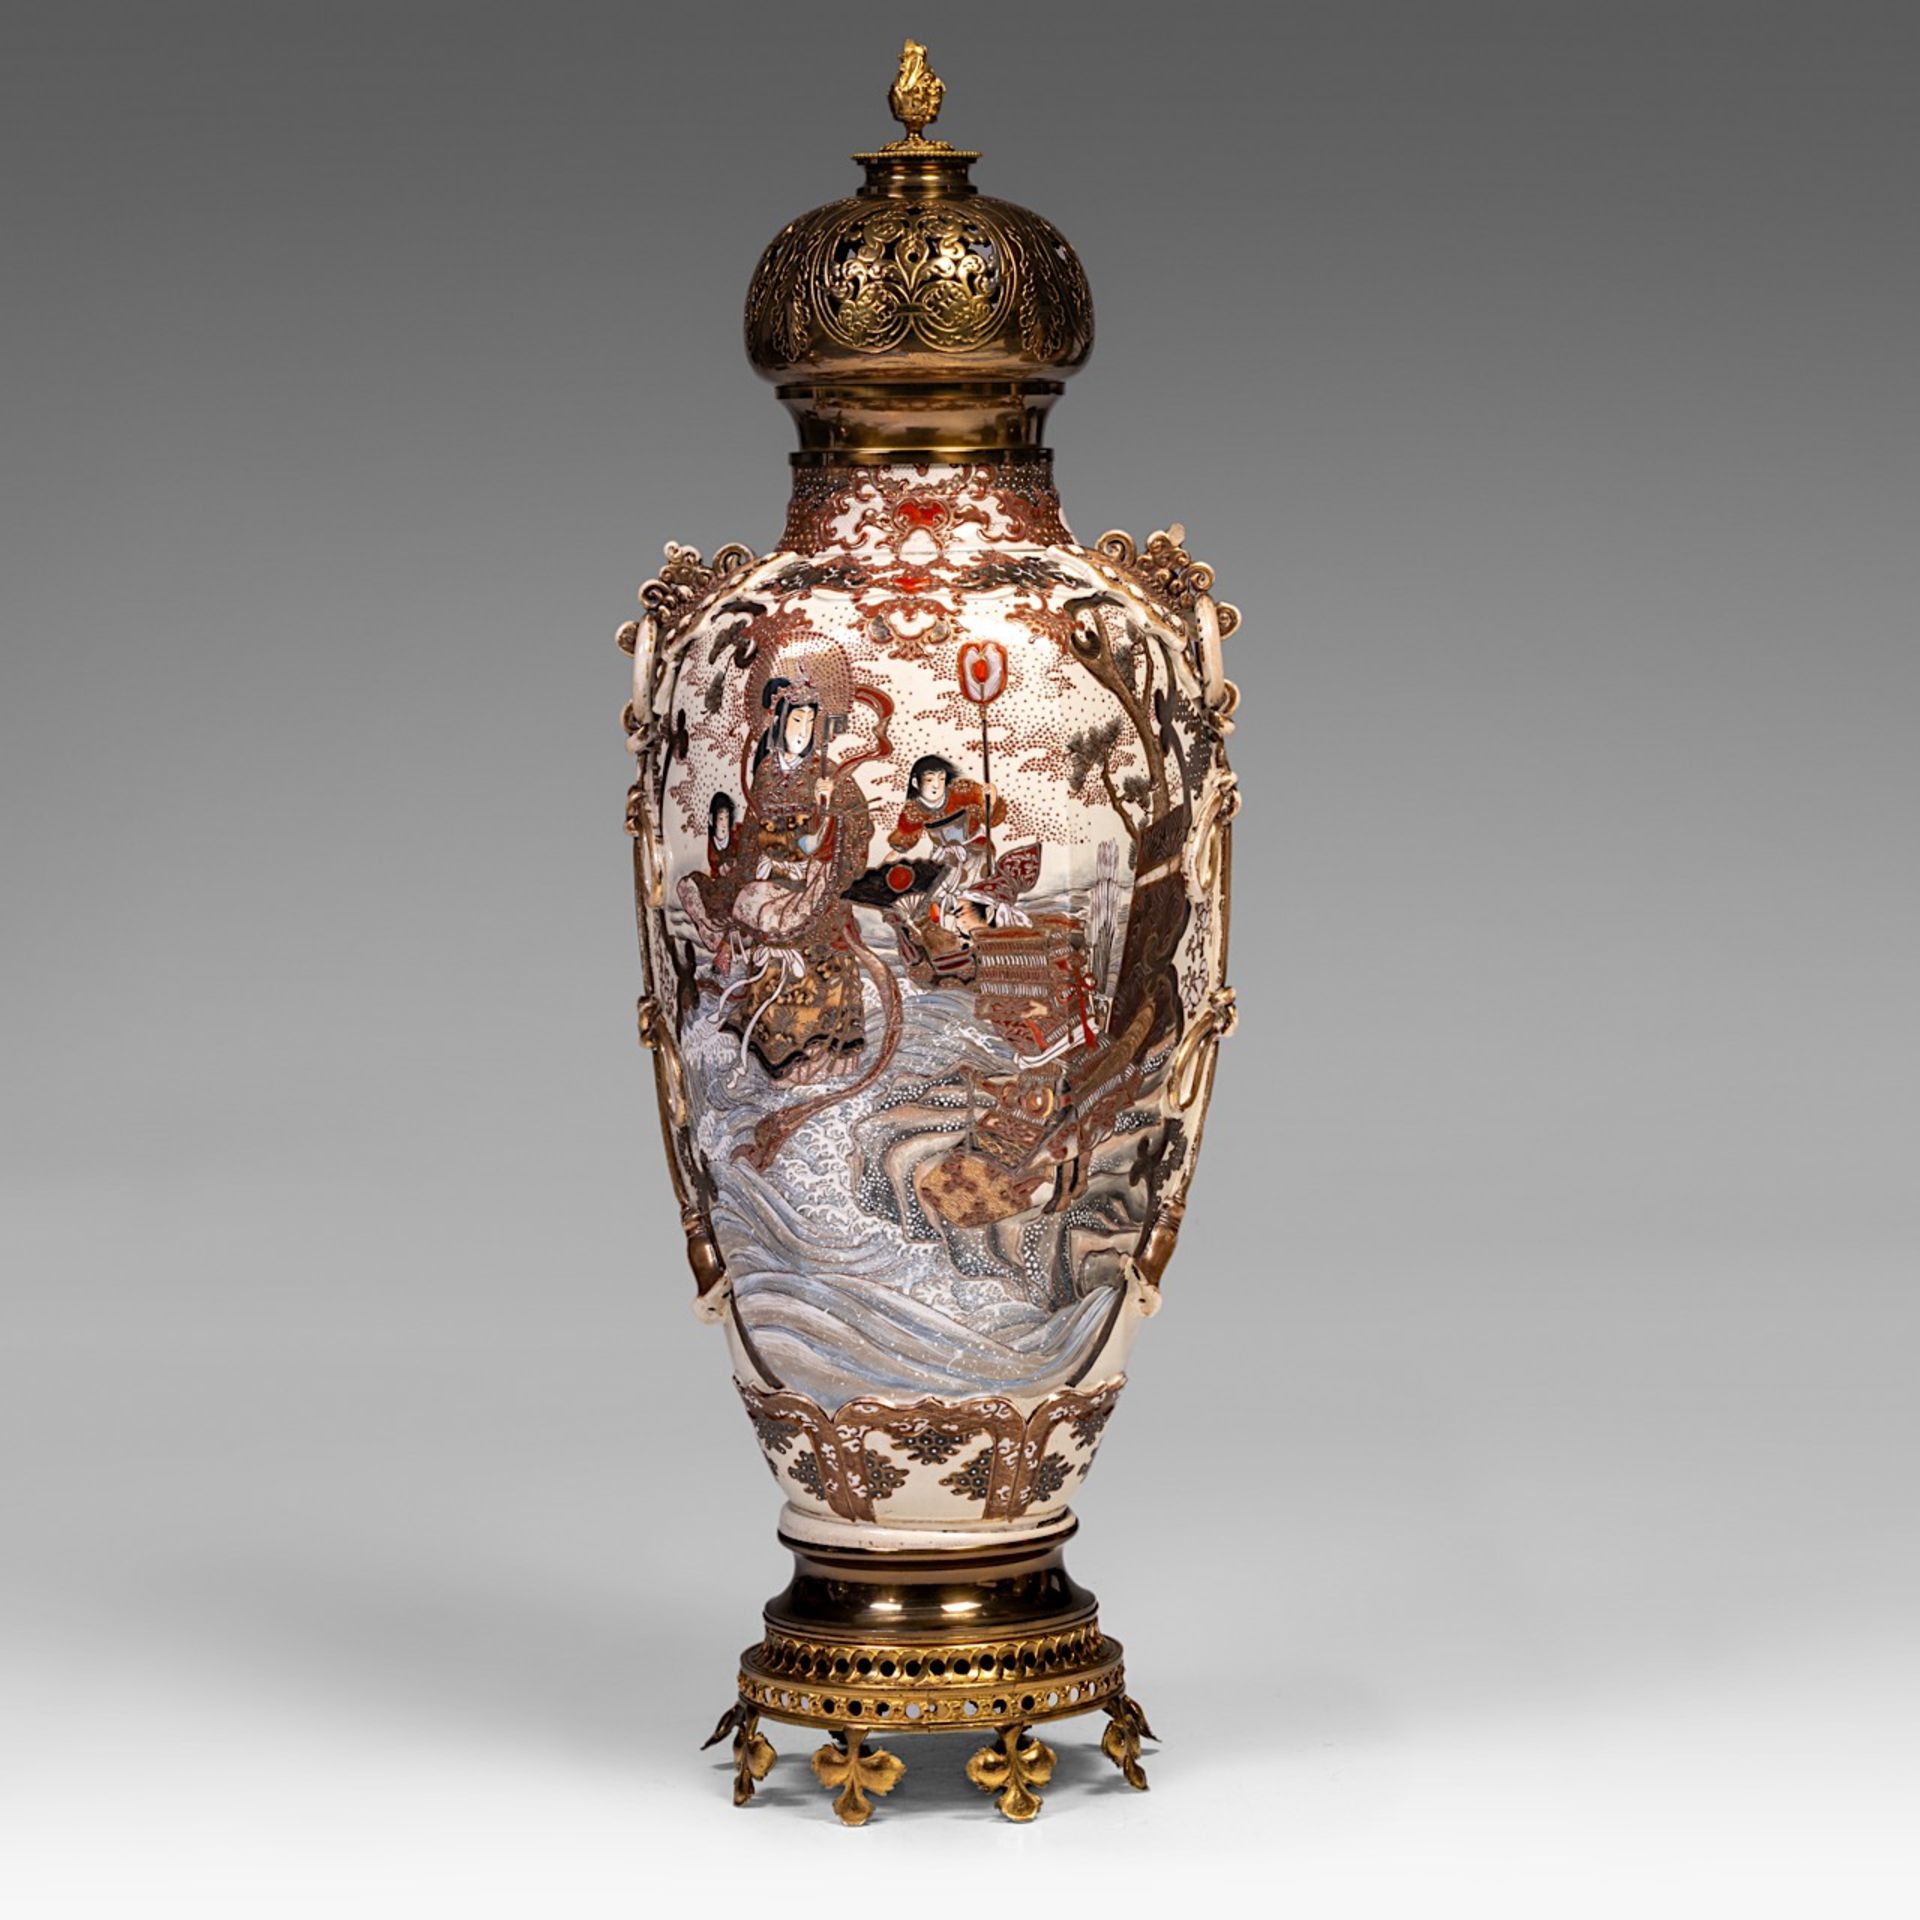 A large Japanese Satsuma vase with gilt bronze lid and base, late 19thC/20thC, total H 108 cm - Image 3 of 6